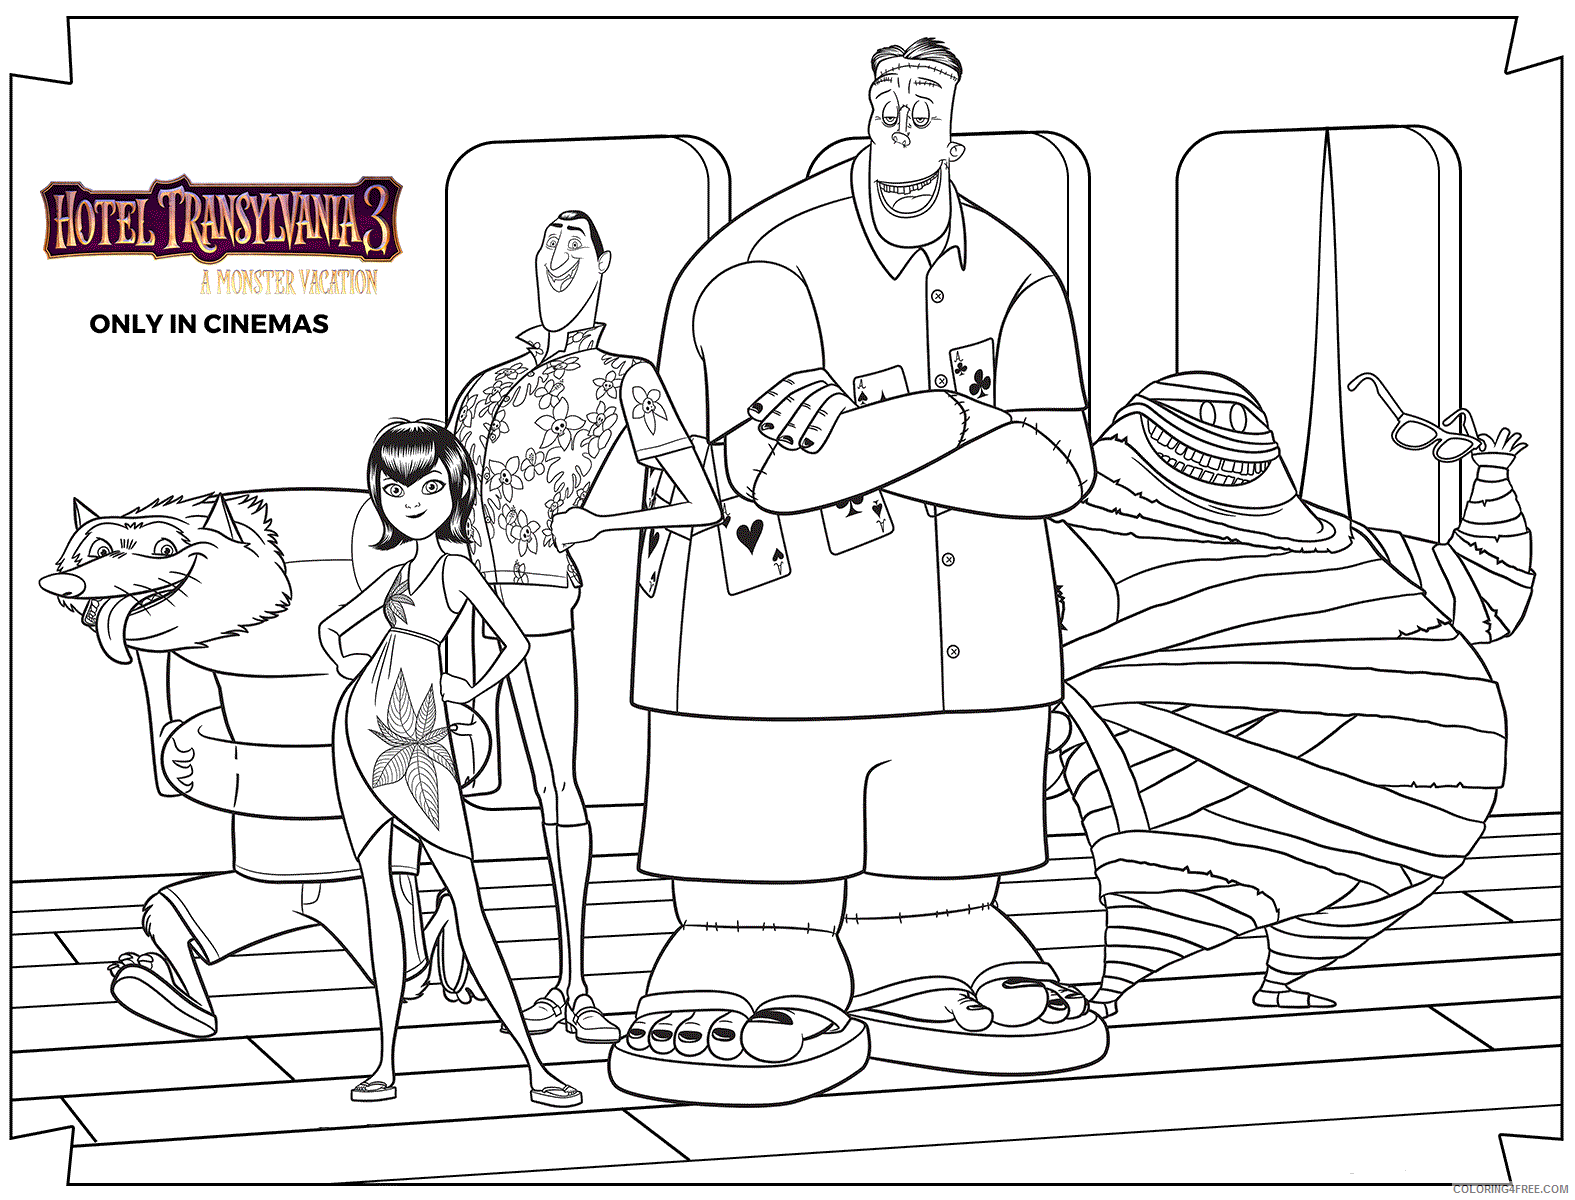 Hotel Transylvania Coloring Pages TV Film Printable 2020 03838 Coloring4free